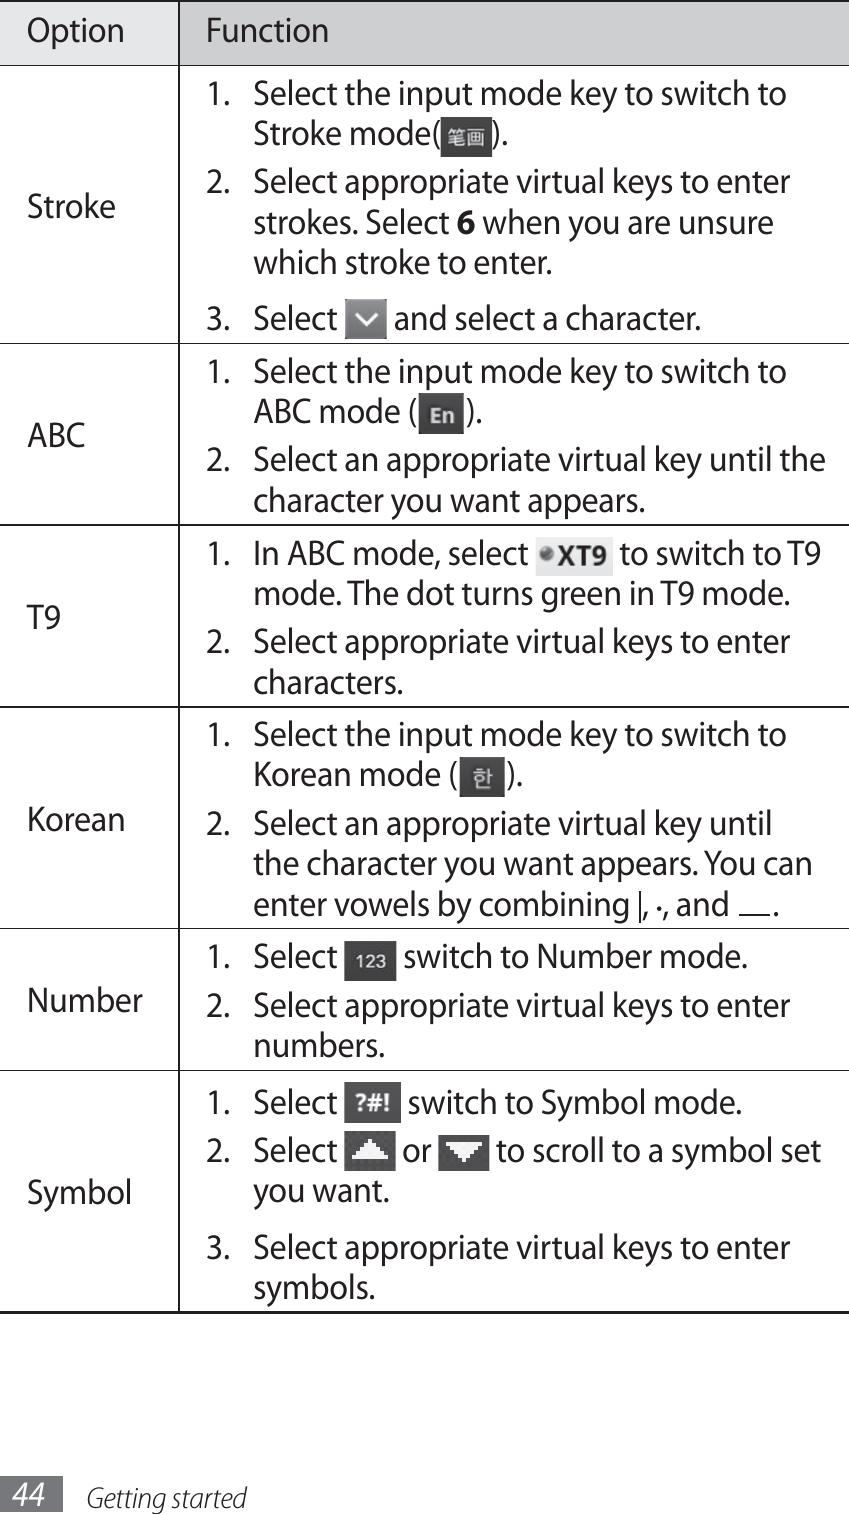 Getting started44Option FunctionStrokeSelect the input mode key to switch to 1. Stroke mode( ).Select appropriate virtual keys to enter 2. strokes. Select 6 when you are unsure which stroke to enter.Select 3.   and select a character.ABCSelect the input mode key to switch to 1. ABC mode ( ).Select an appropriate virtual key until the 2. character you want appears.T9In ABC mode, select 1.   to switch to T9 mode. The dot turns green in T9 mode.Select appropriate virtual keys to enter 2. characters.KoreanSelect the input mode key to switch to 1. Korean mode ( ).Select an appropriate virtual key until 2. the character you want appears. You can enter vowels by combining  ,  , and  .NumberSelect 1.   switch to Number mode.Select appropriate virtual keys to enter 2. numbers.SymbolSelect 1.   switch to Symbol mode.Select 2.   or   to scroll to a symbol set you want.Select appropriate virtual keys to enter 3. symbols.